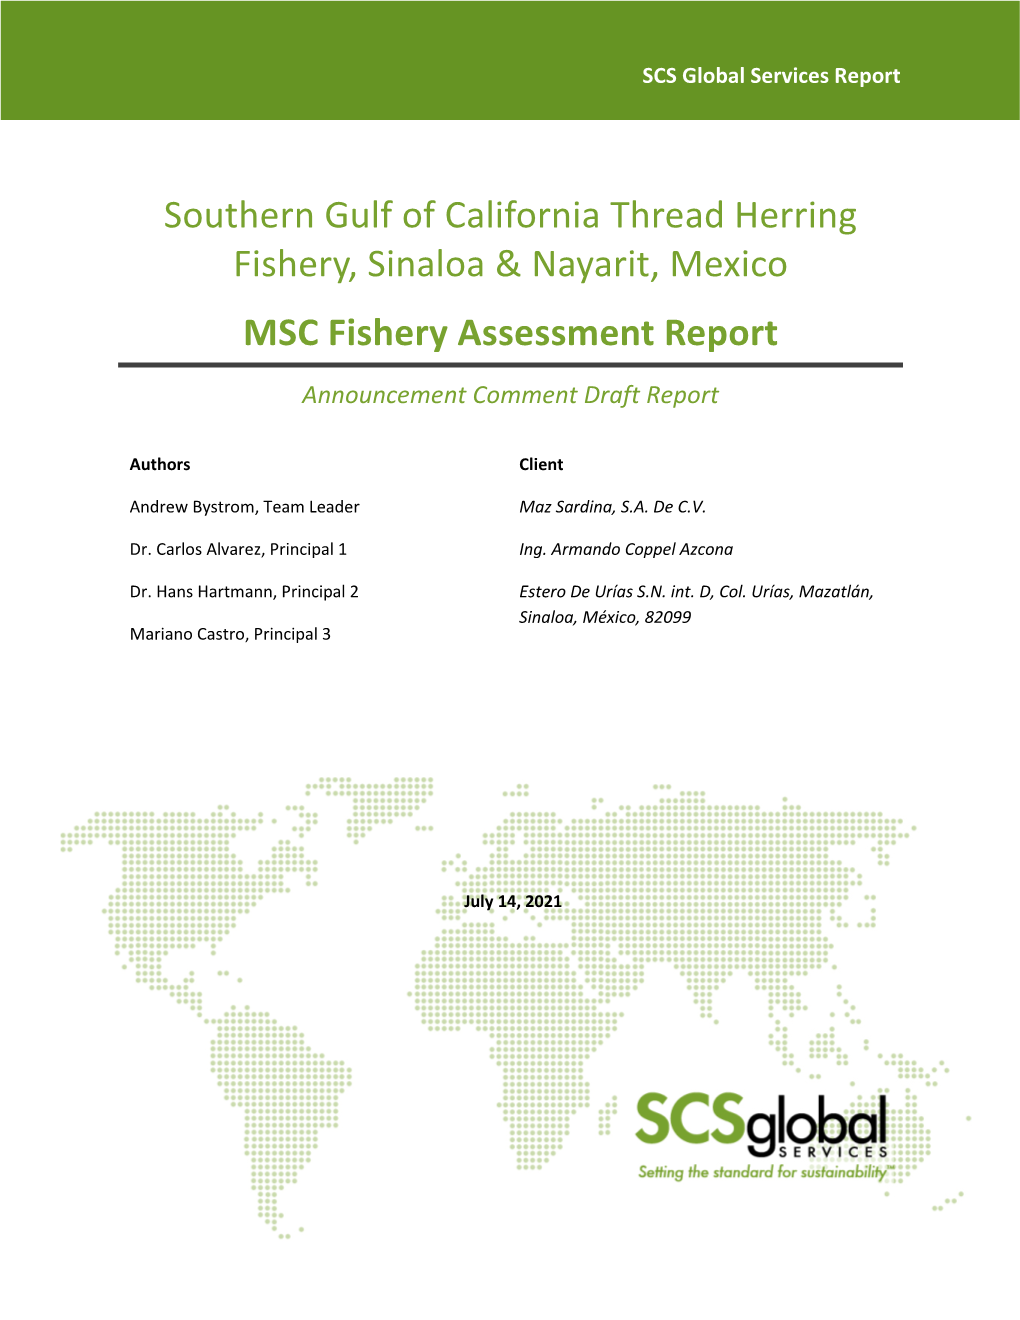 Southern Gulf of California Thread Herring Fishery, Sinaloa & Nayarit, Mexico MSC Fishery Assessment Report Announcement Comment Draft Report